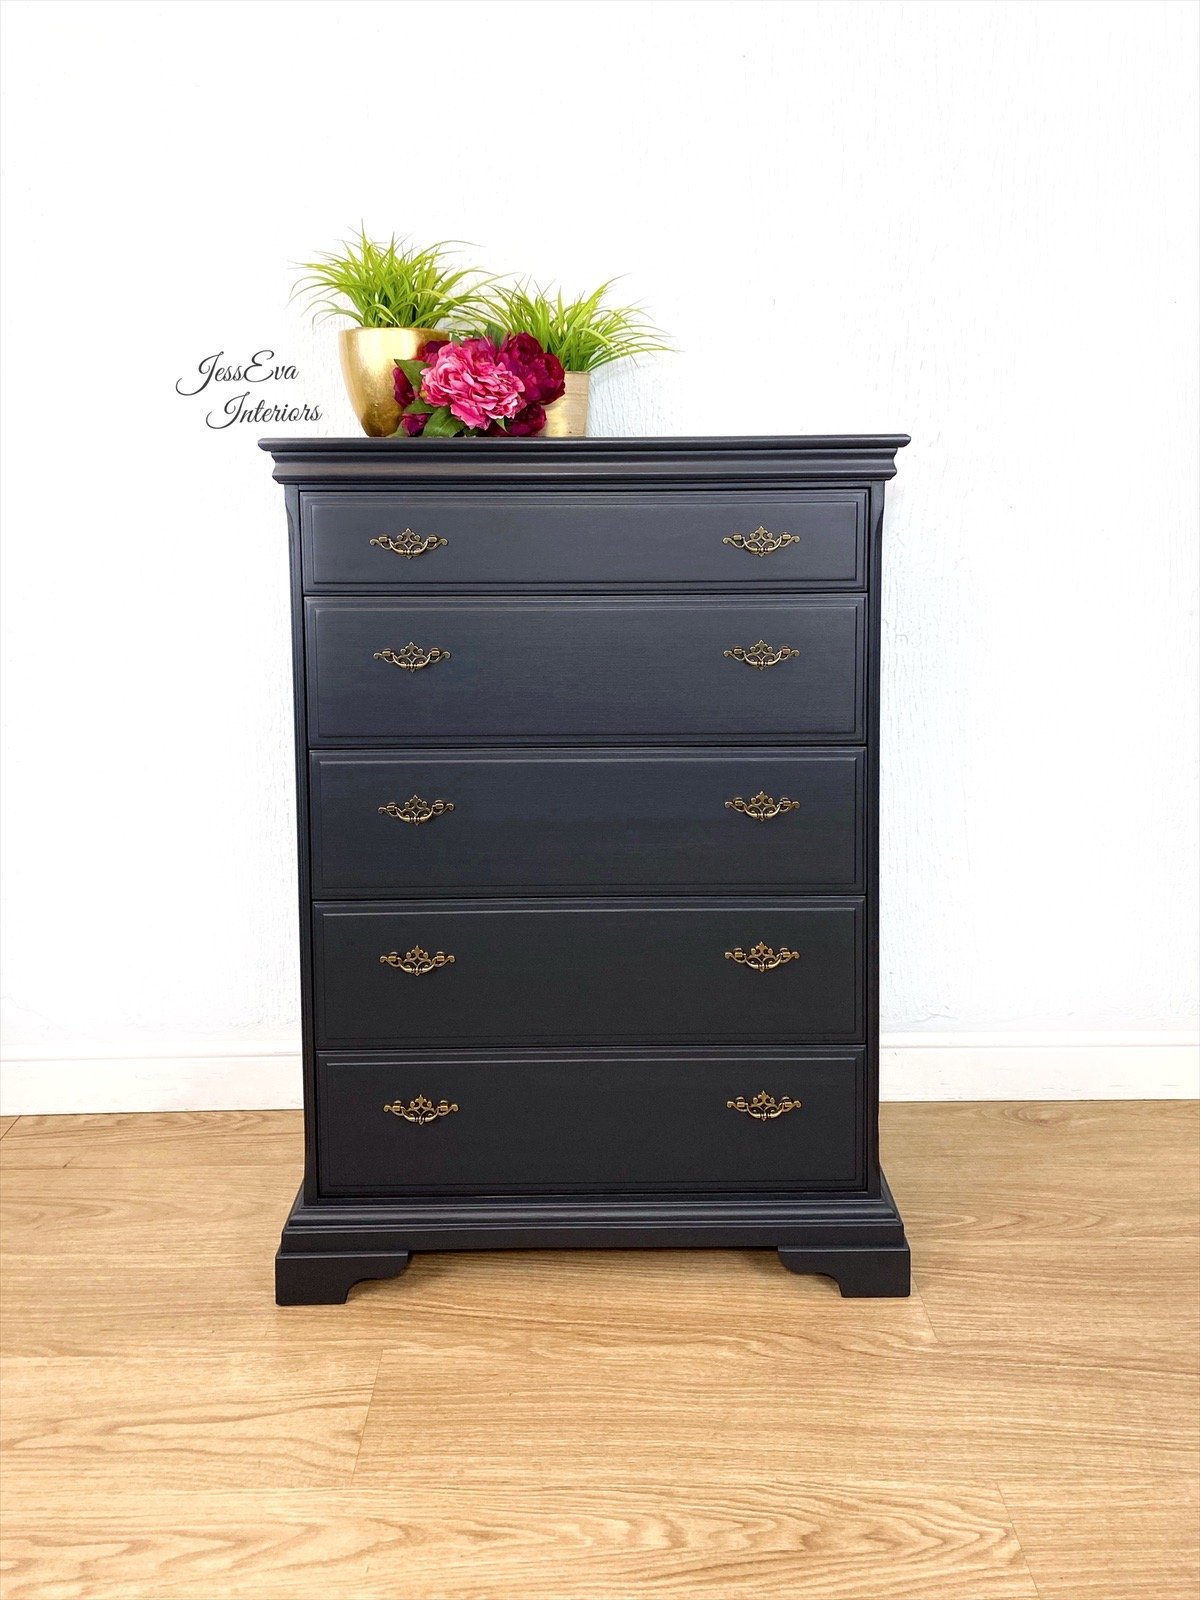 Large Stag Chest of Drawers / Tallboy painted in charcoal grey.